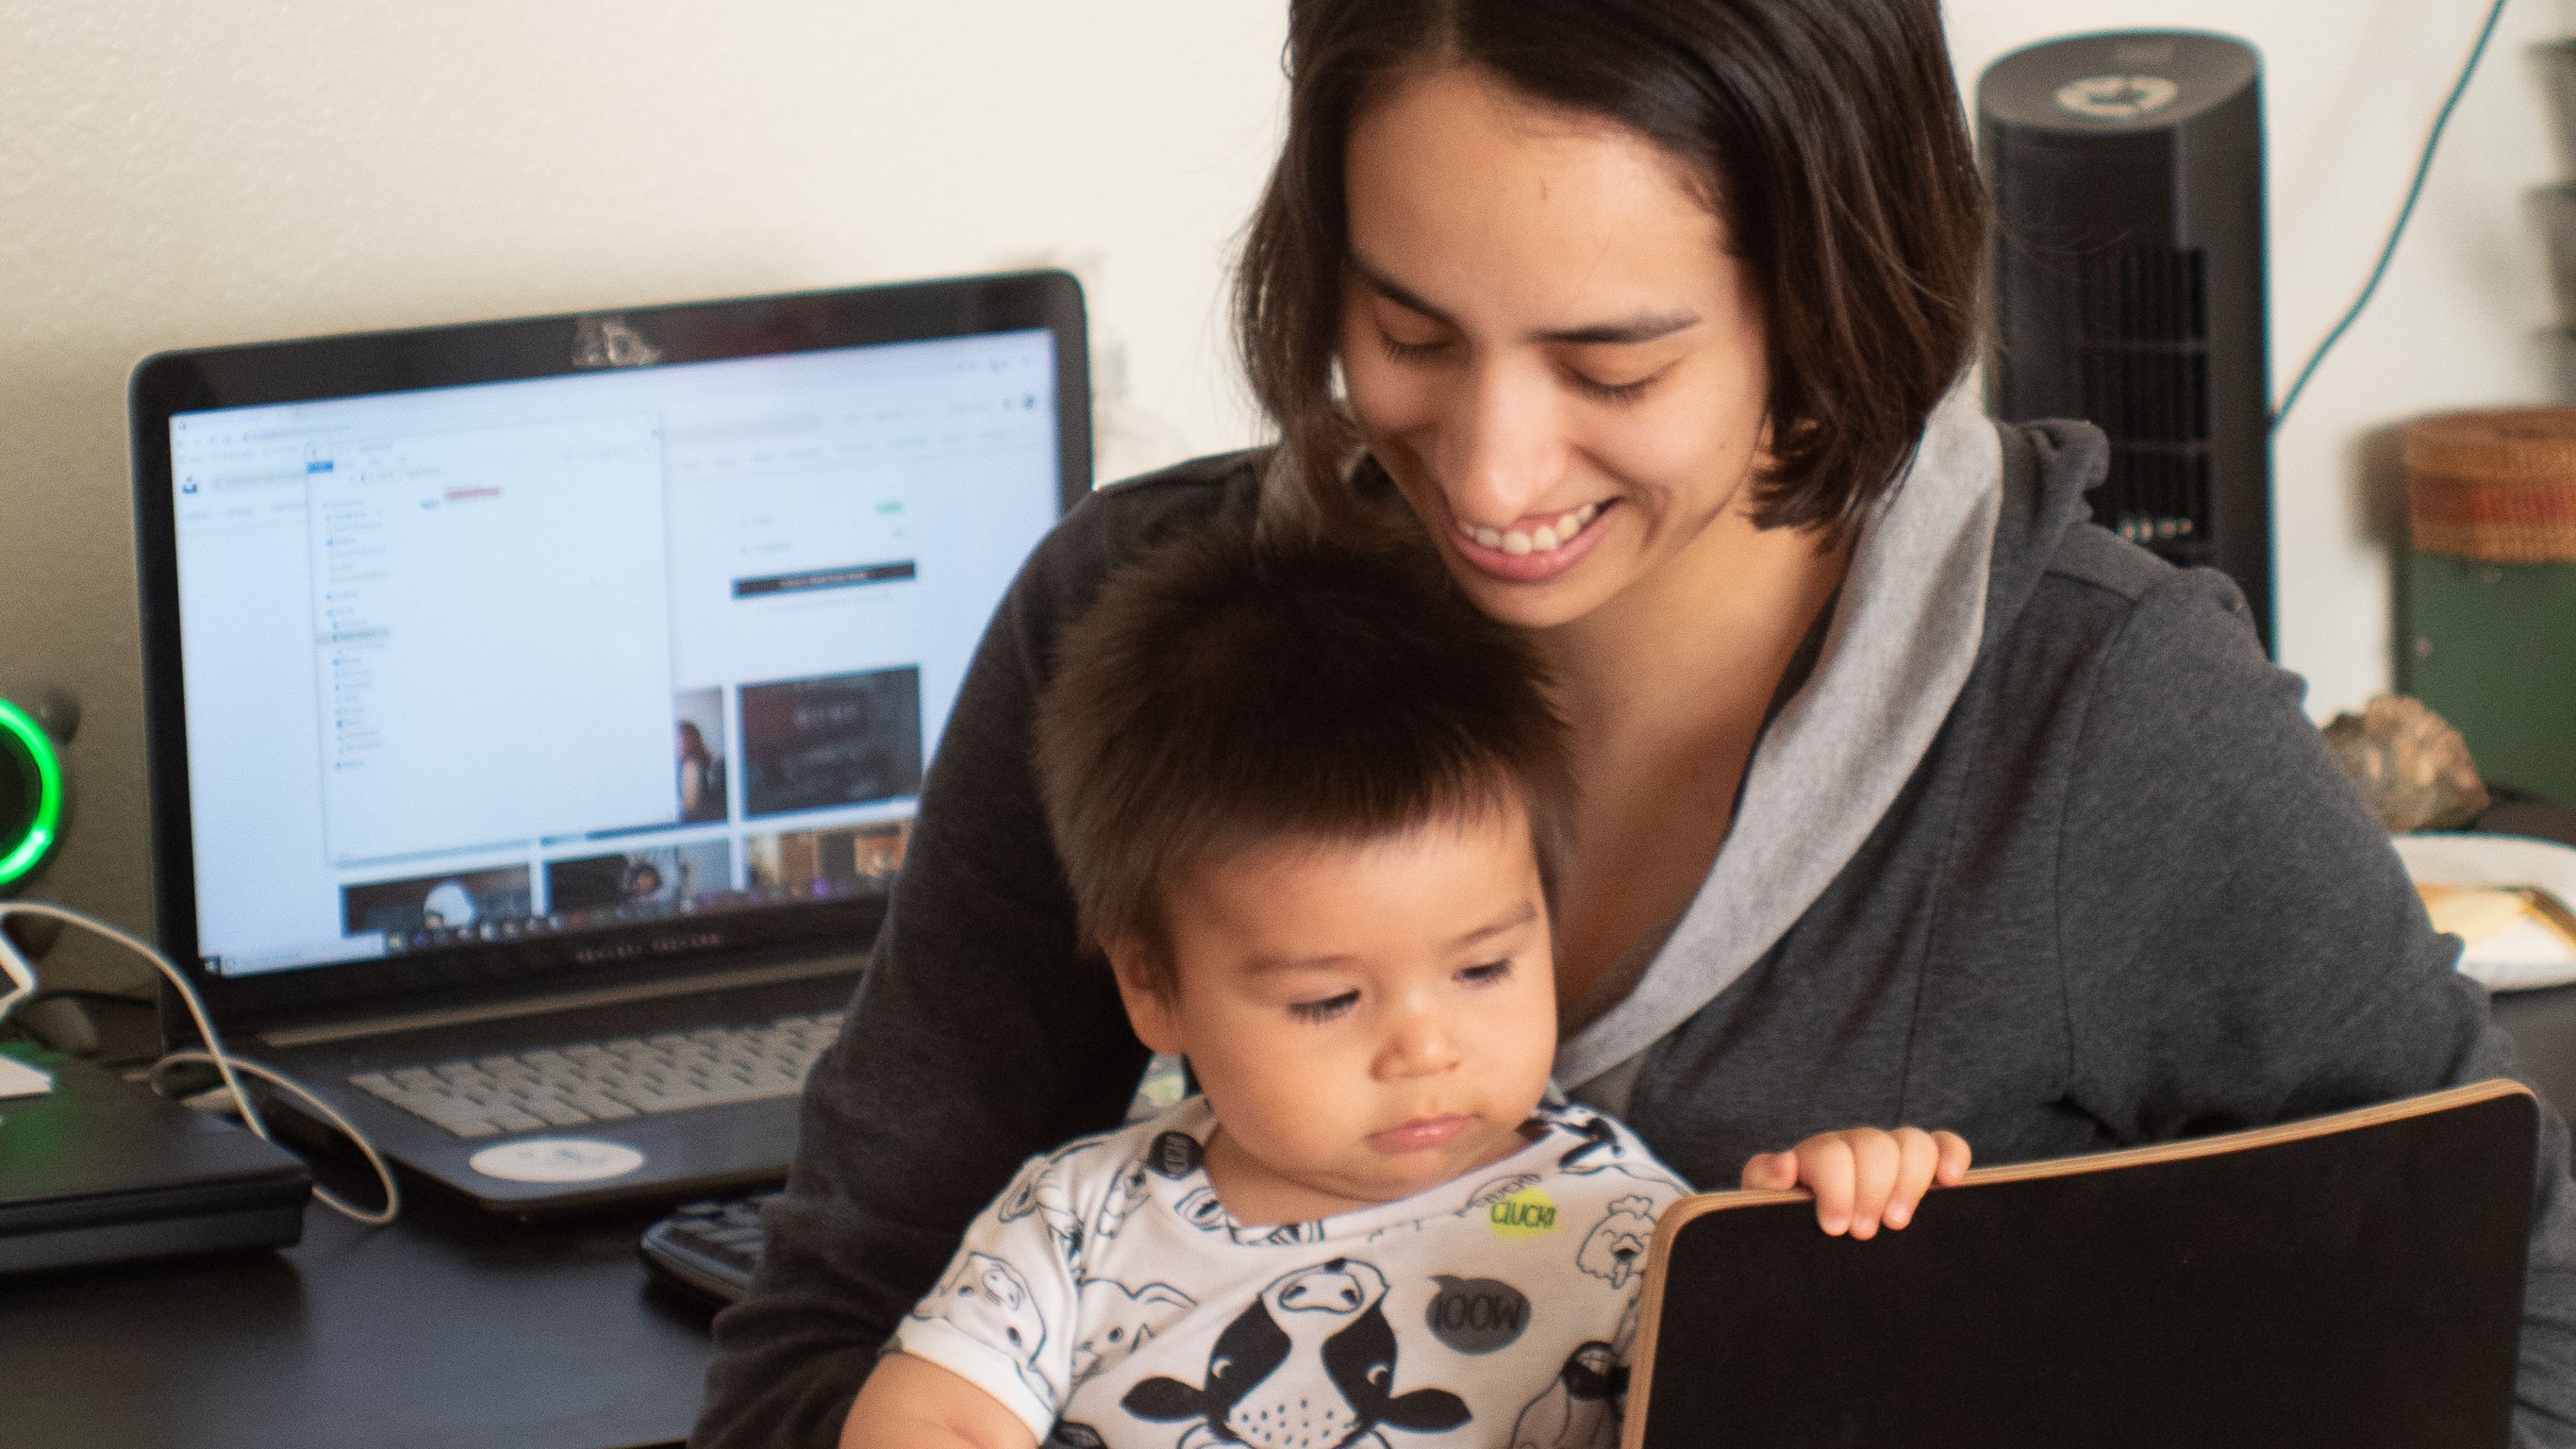 A young Asian woman holding a small child with a laptop computer on the desk behind her.